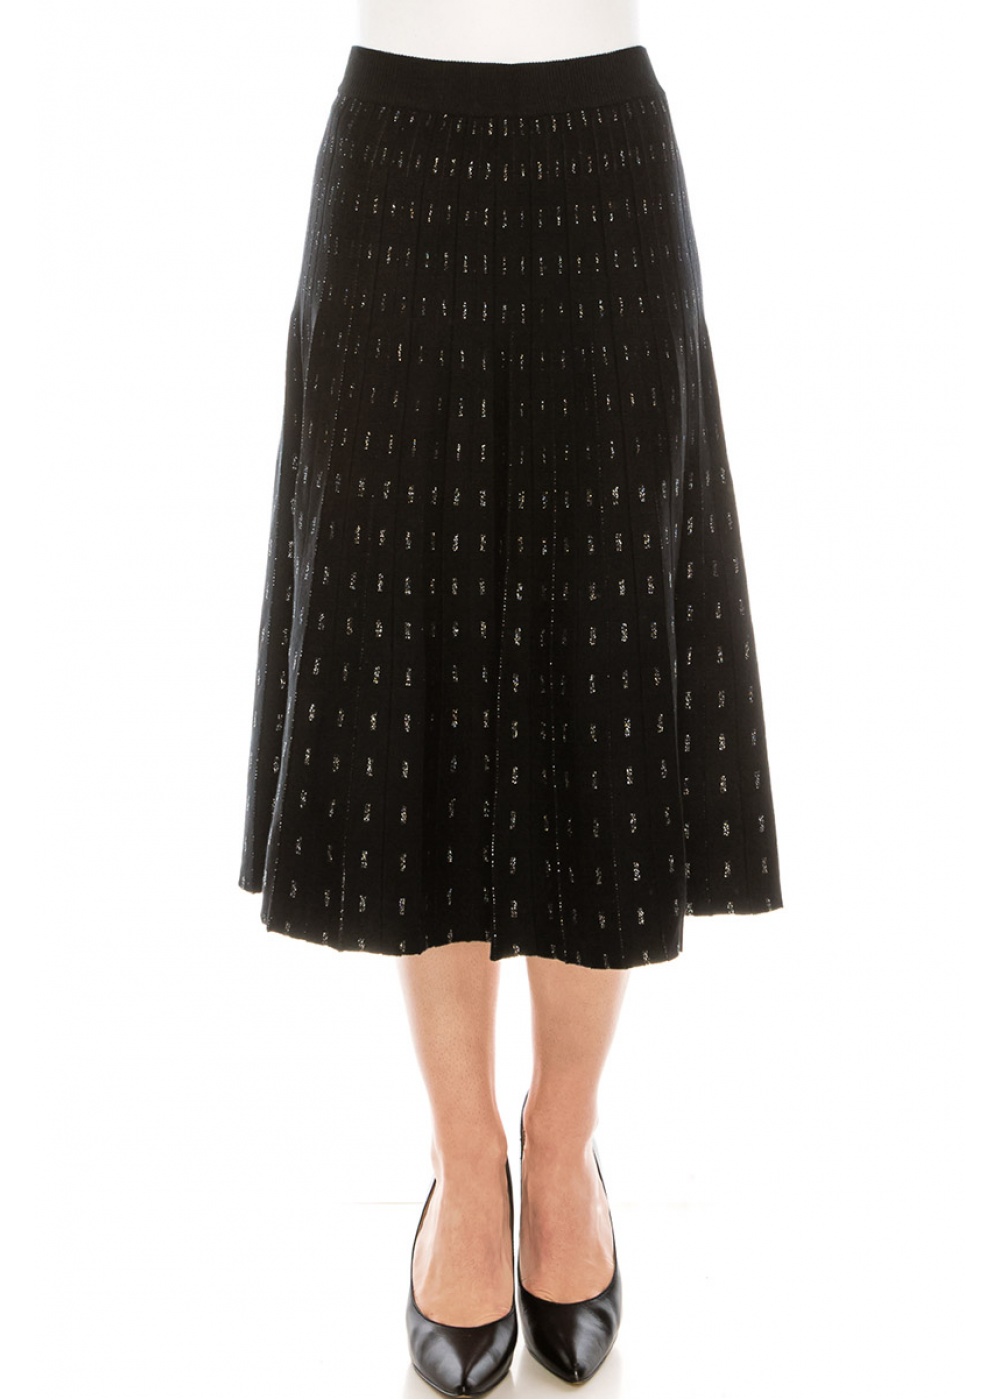 A-line skirt with a shiny pattern